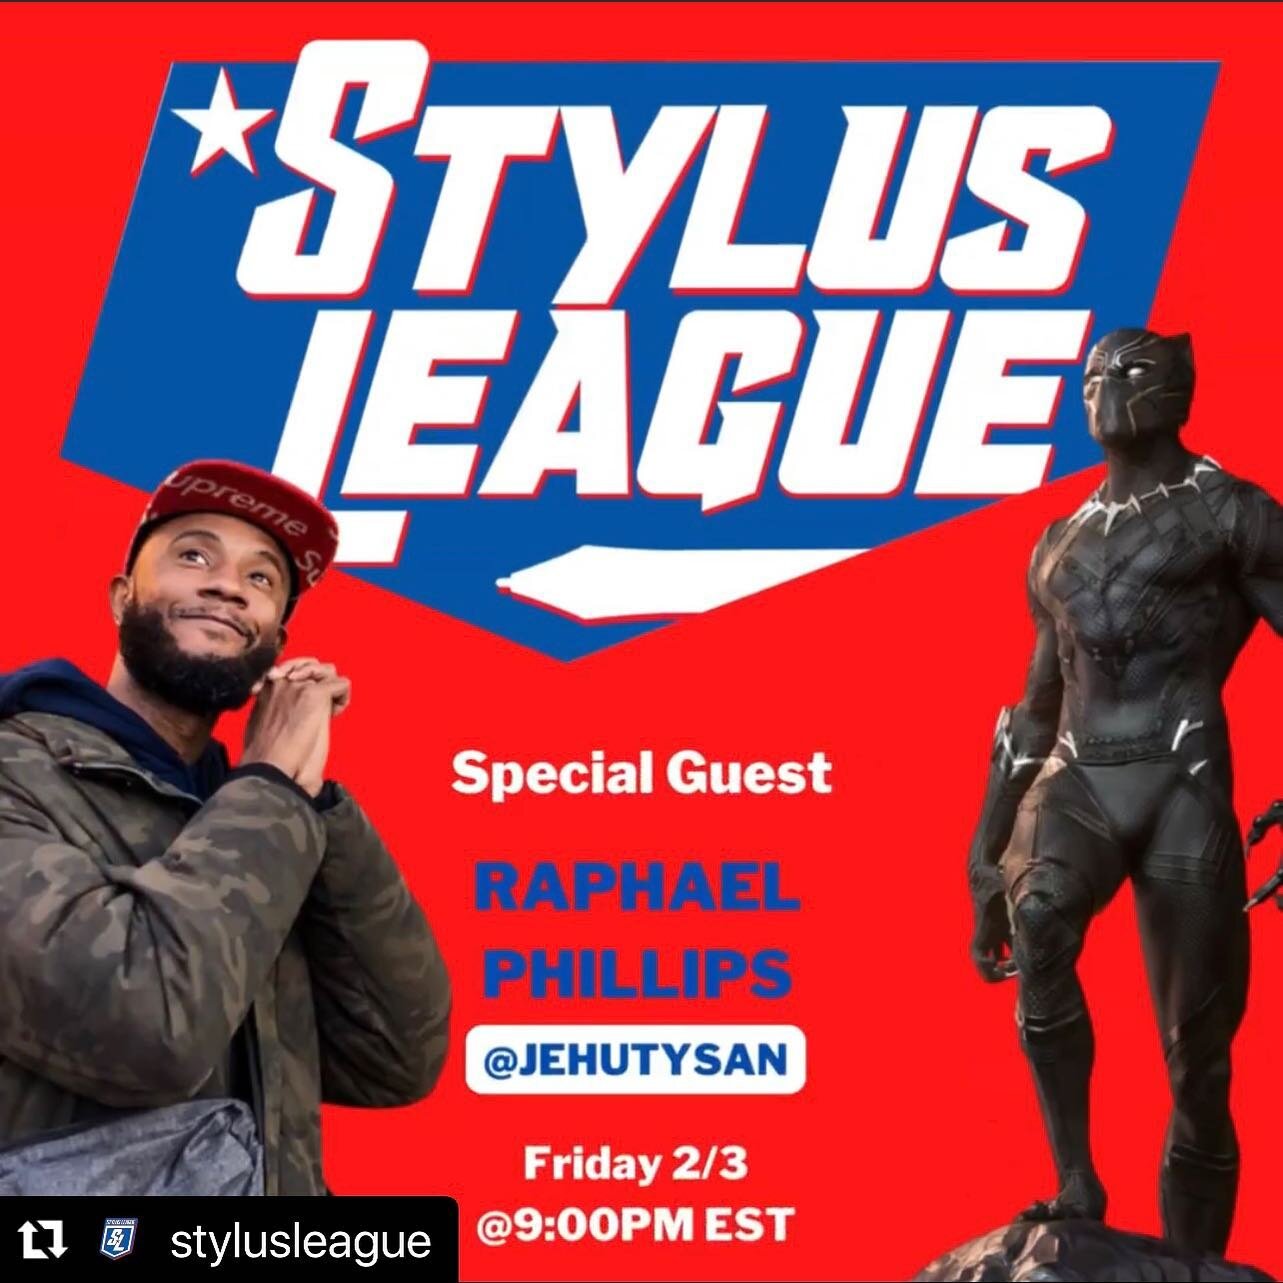 Every Friday of this month, I&rsquo;ll be sculpting live with the @stylusleague homies, @miketartworks and @mlcreative3d .  Sculpting live&hellip;..NO PRESSURE AT ALL 😅
All the pertinent info below ⬇️ 
・・・
Join us Friday 2/3 for the first of the Spa